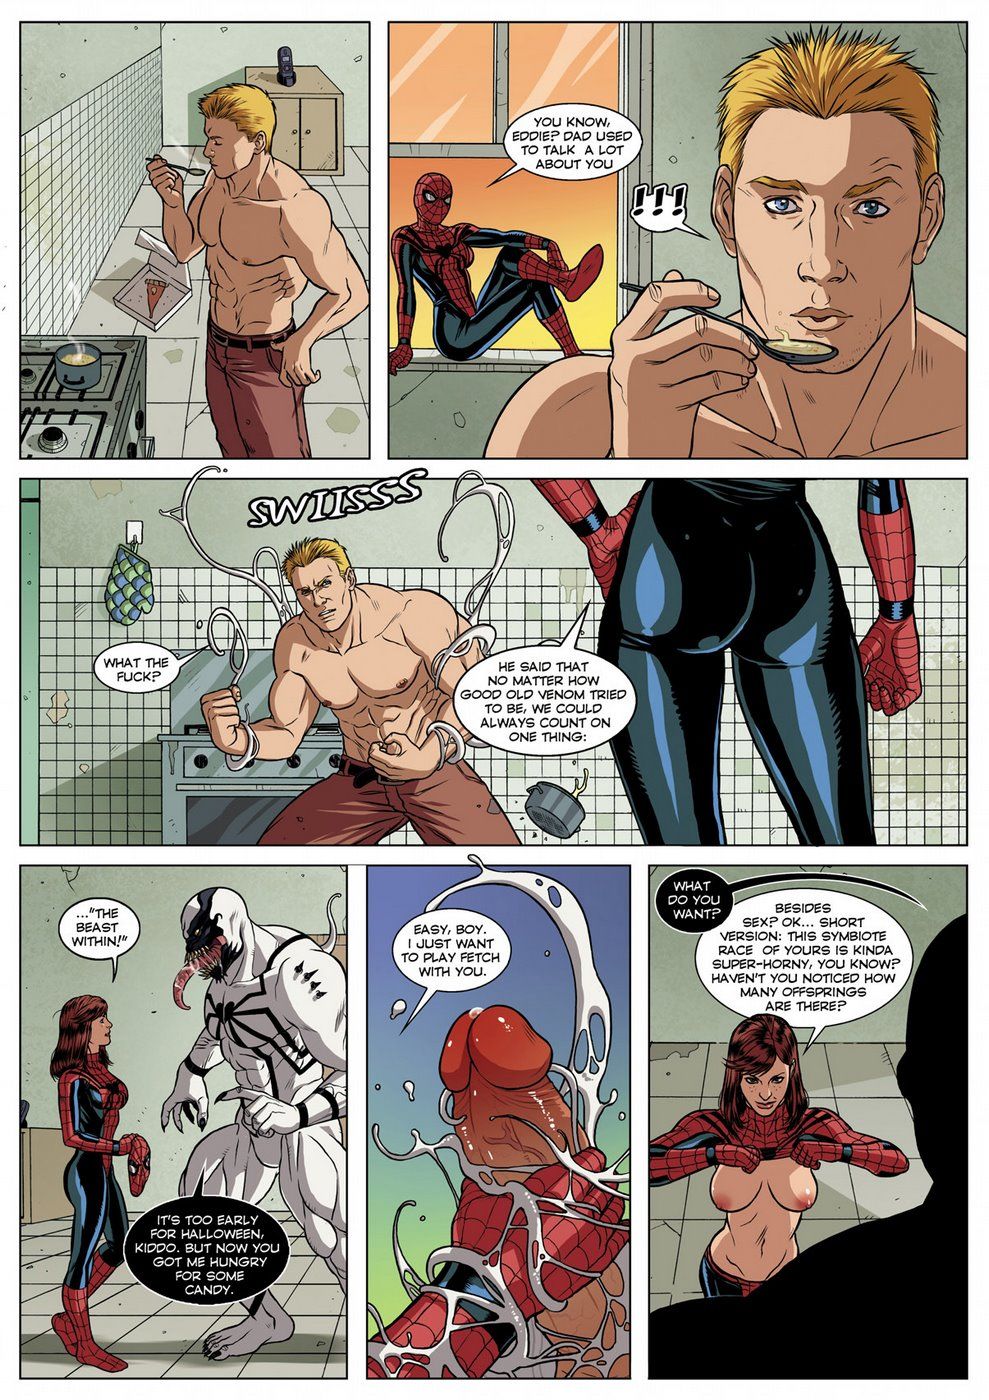 Spider-Man Sexual Symbiosis 1 page 20